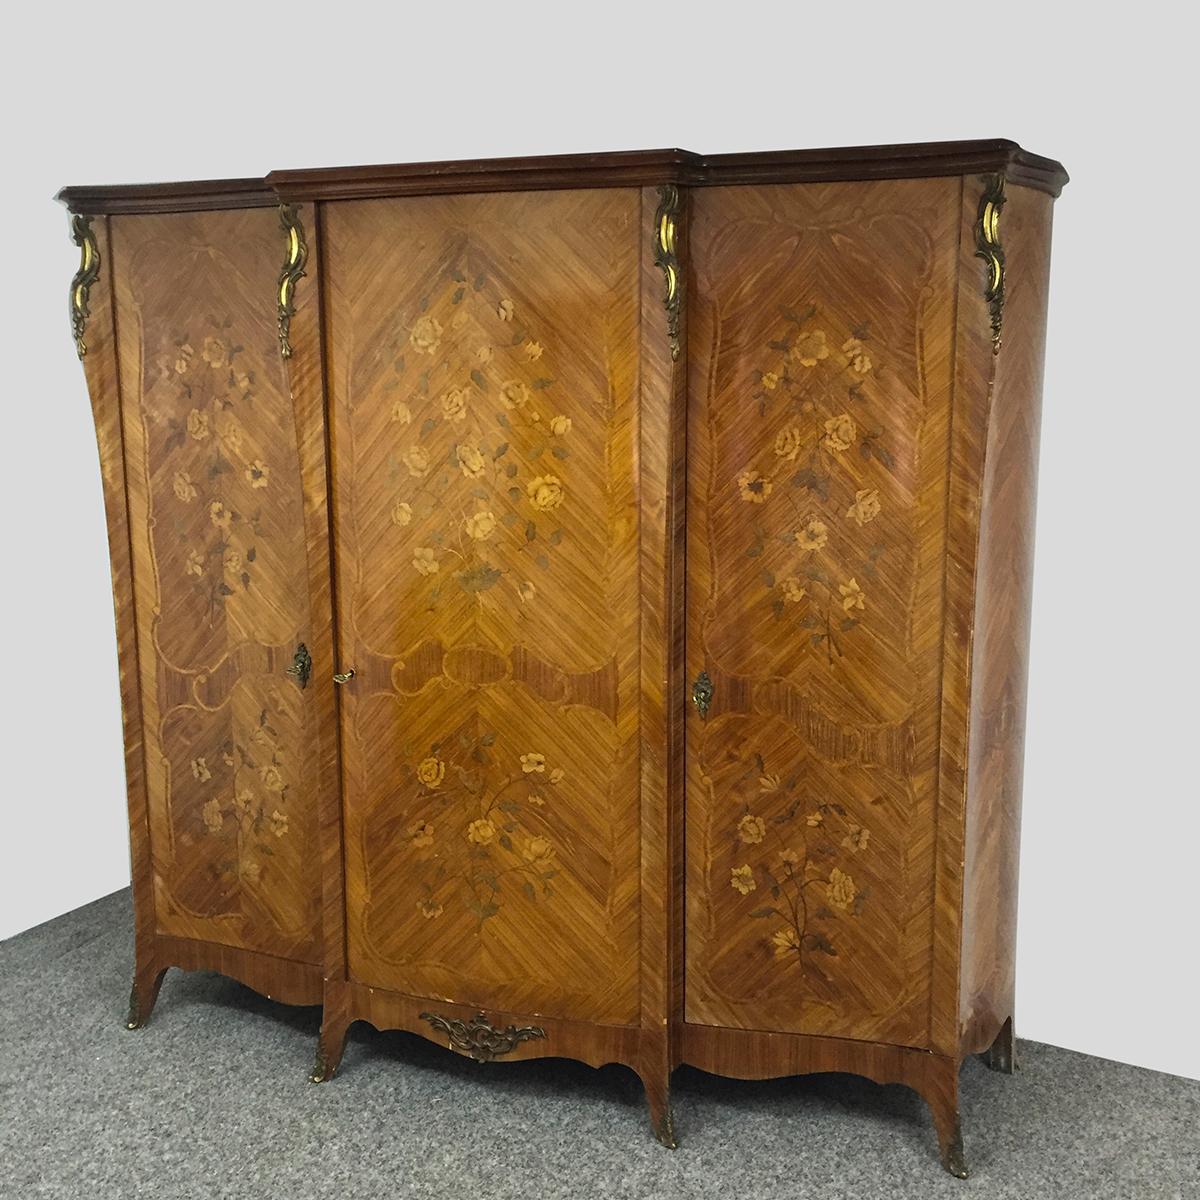 A Beautiful French three doors triple armoire in the style of Louis XV, performed in a marquetry technique, palisander veneer, brass ornaments on the legs and corners. Decorations of roses are displayed on the facade boards. With shelves.